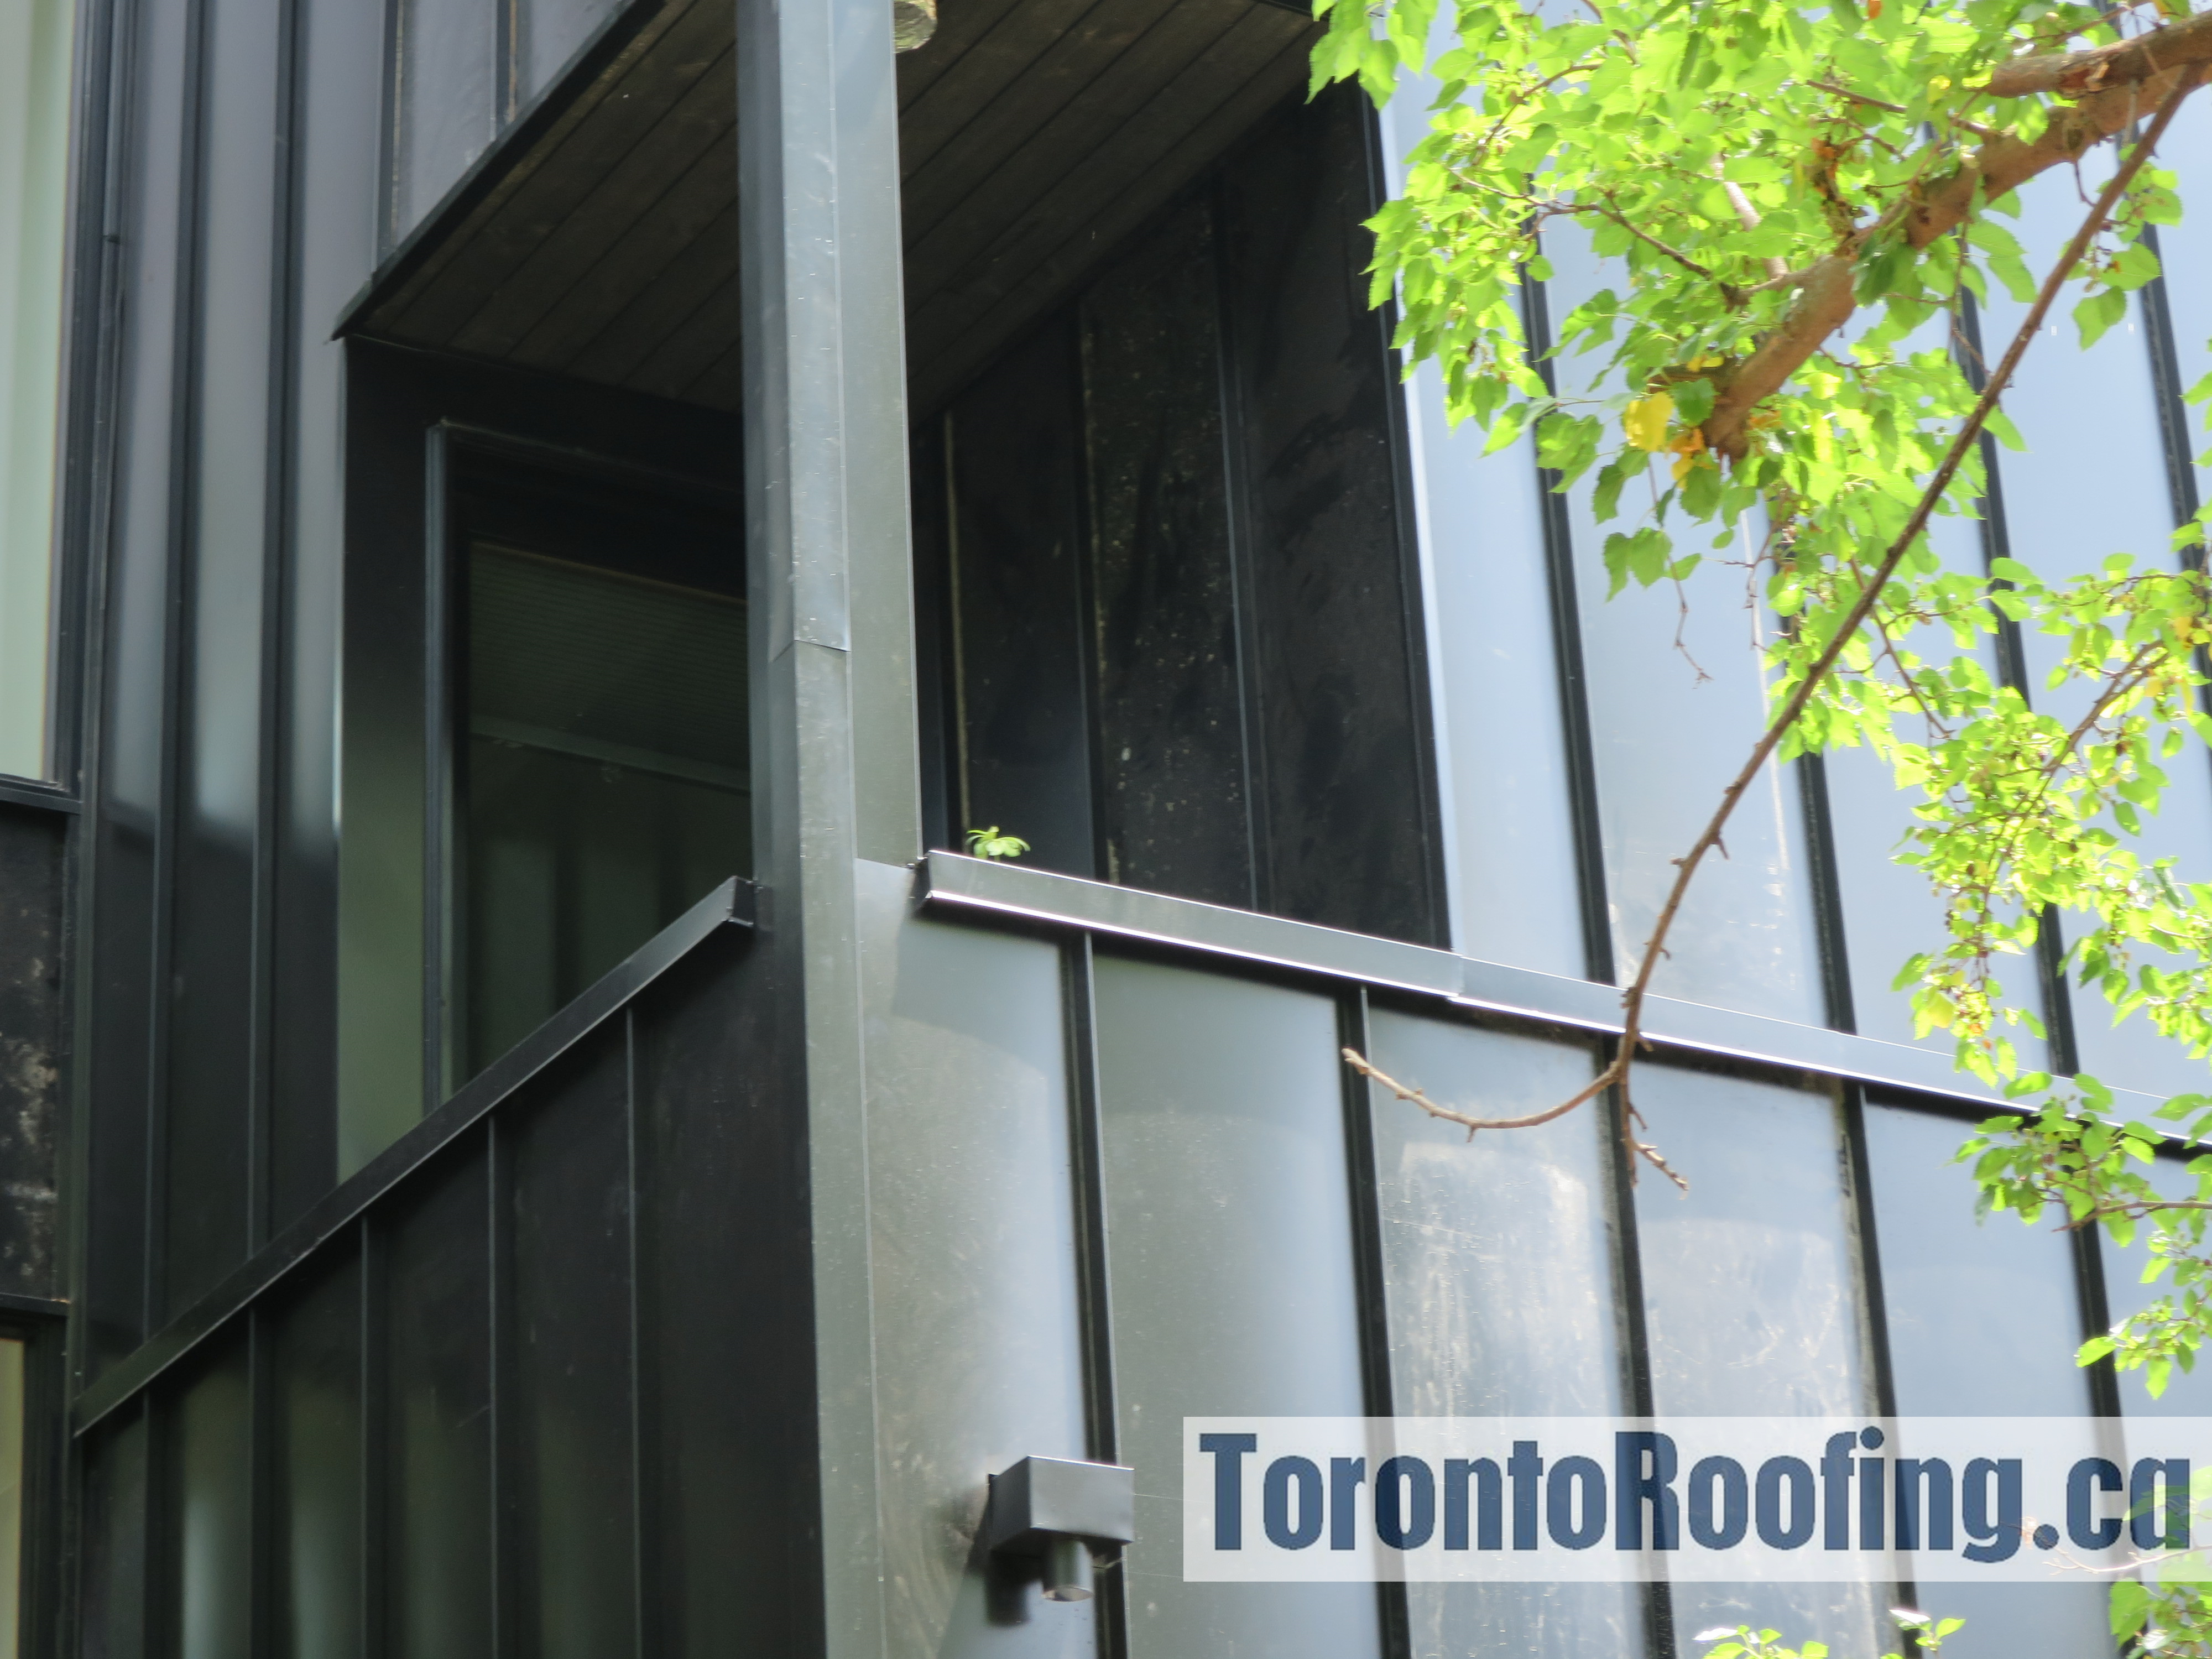 oronto,roofing,roof,siding,metal,copper,wood,modern,homes,aluminum,cladding,architecture,building,contractor,exterior